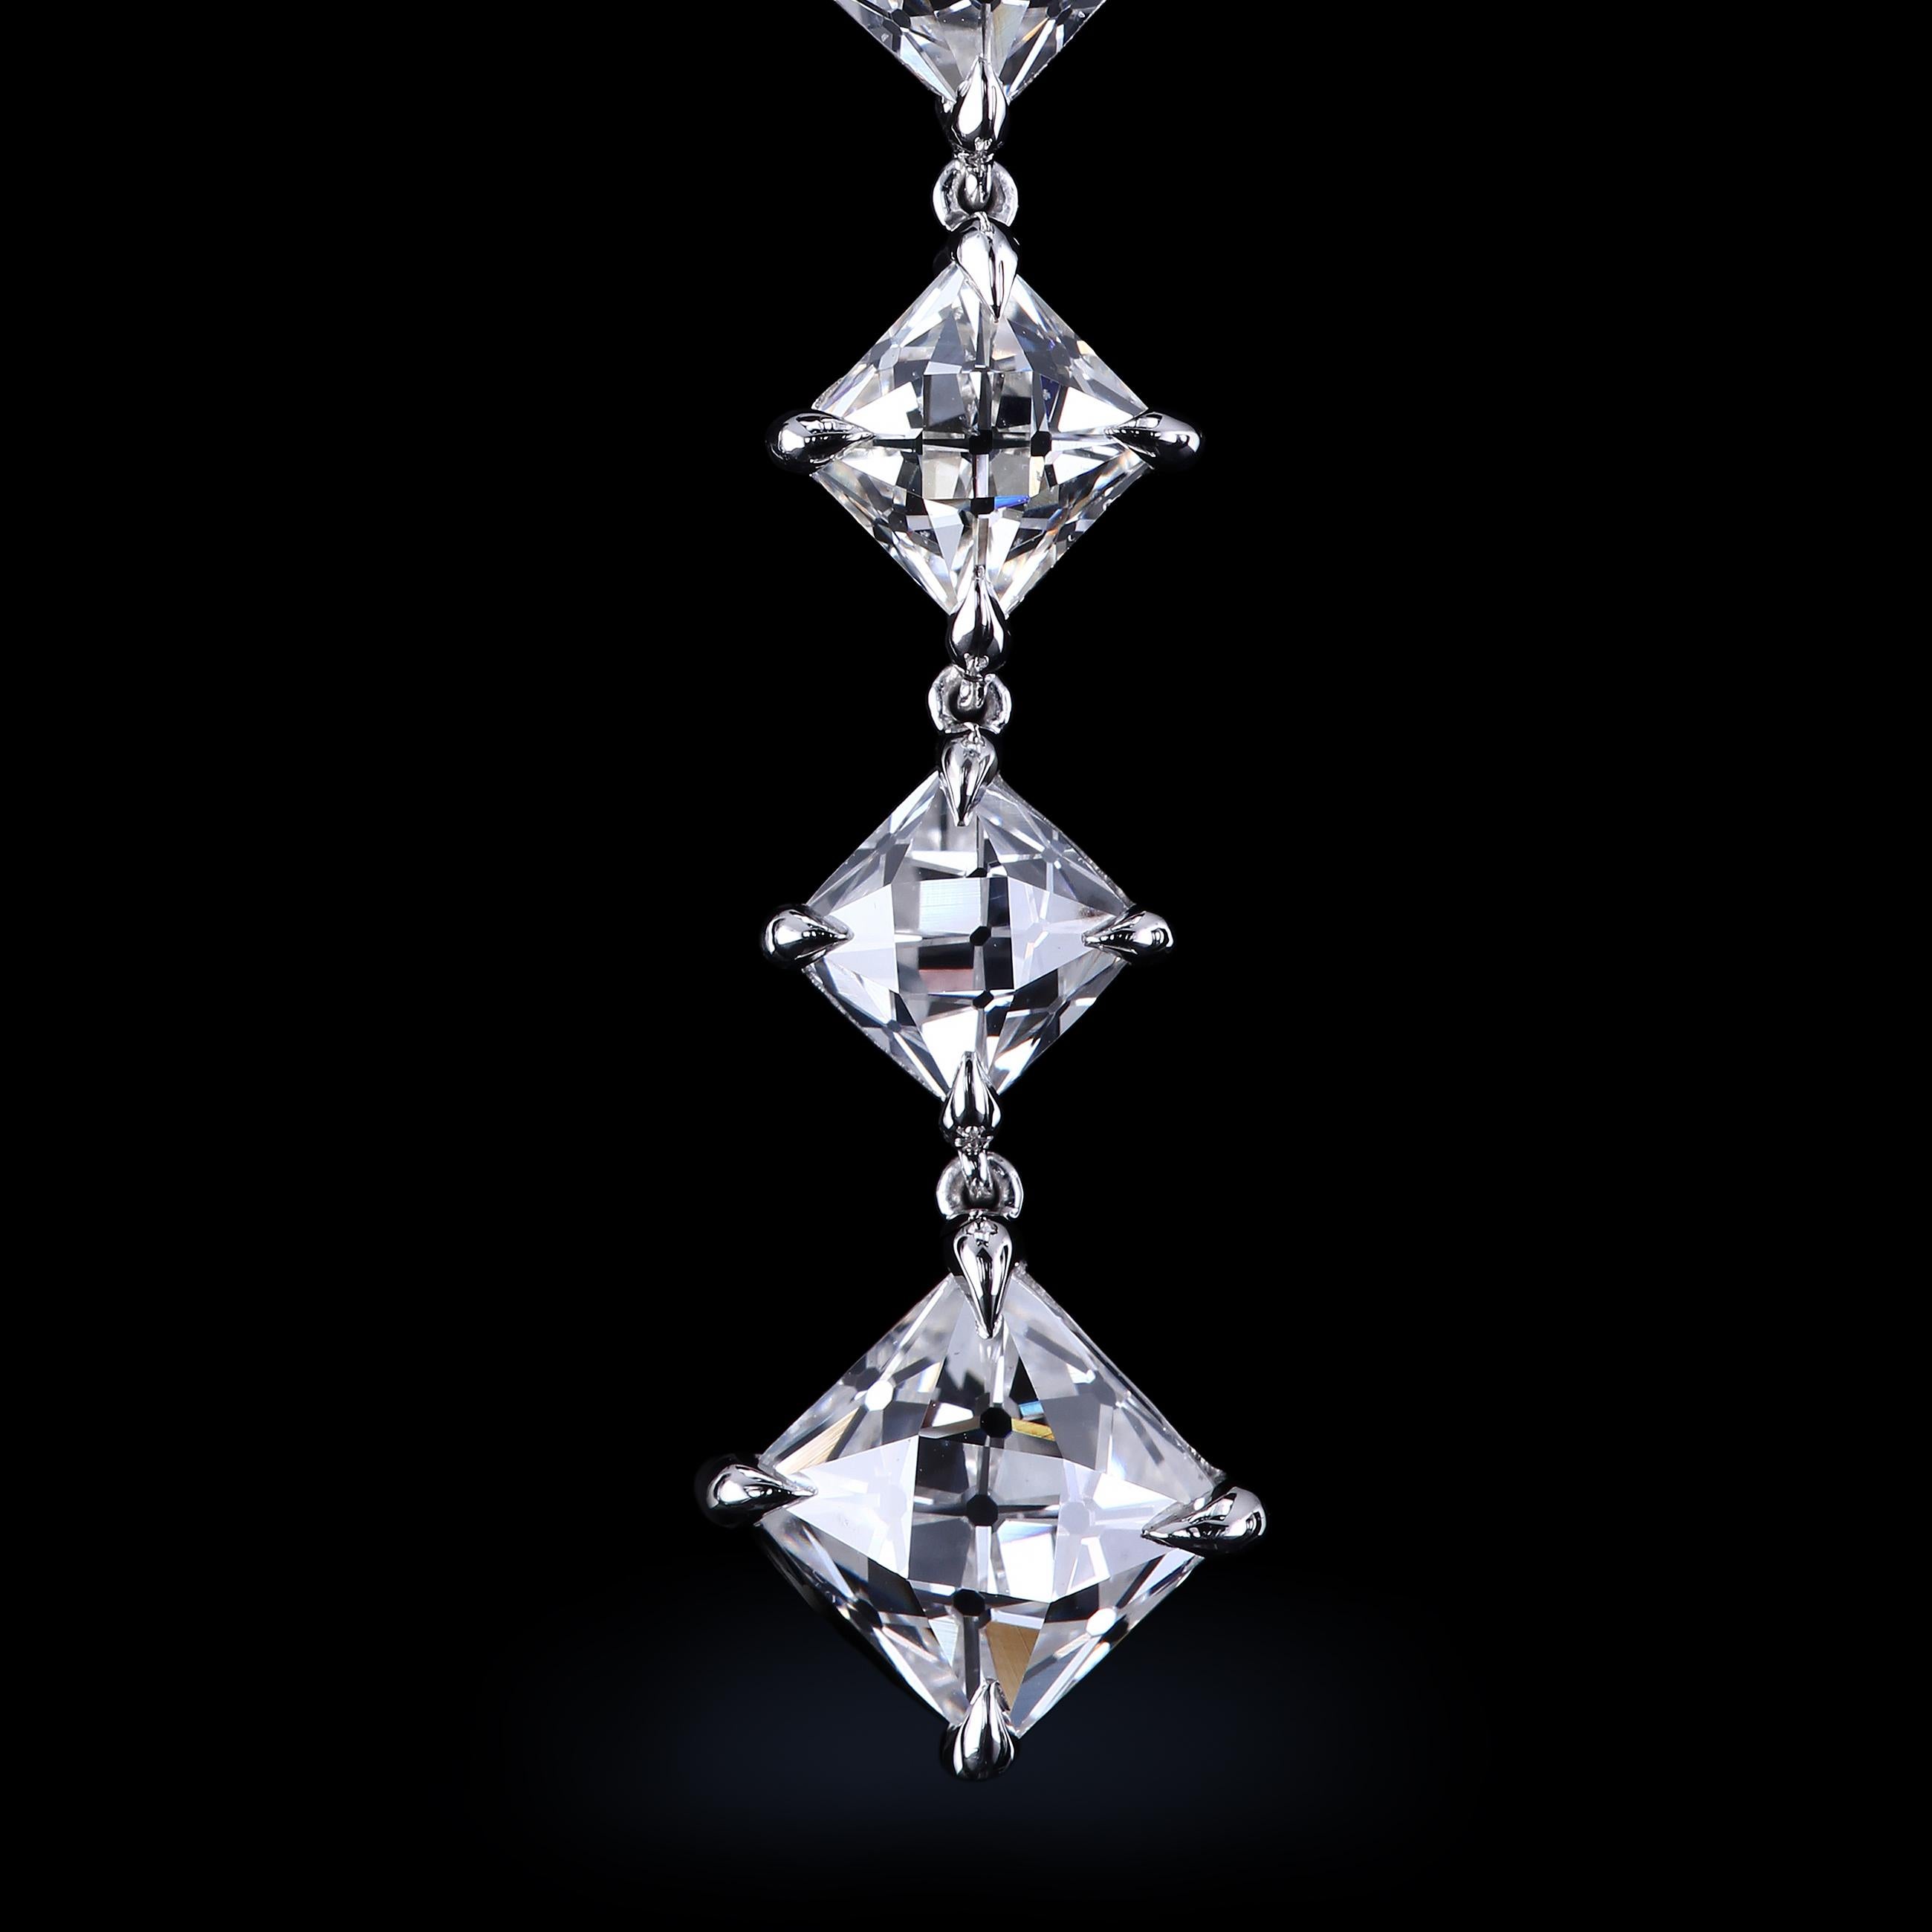 Long open-back drop earrings with True Antique French cut diamonds by Leon Megé.

12 non-certified diamonds total of 9.18 carats H-I/VS2-SI1

Two largest stones being 1.64 ct H/VS2 and 1.63 ct I/SI1 ct respectfully. 

Bespoke platinum wire-work.